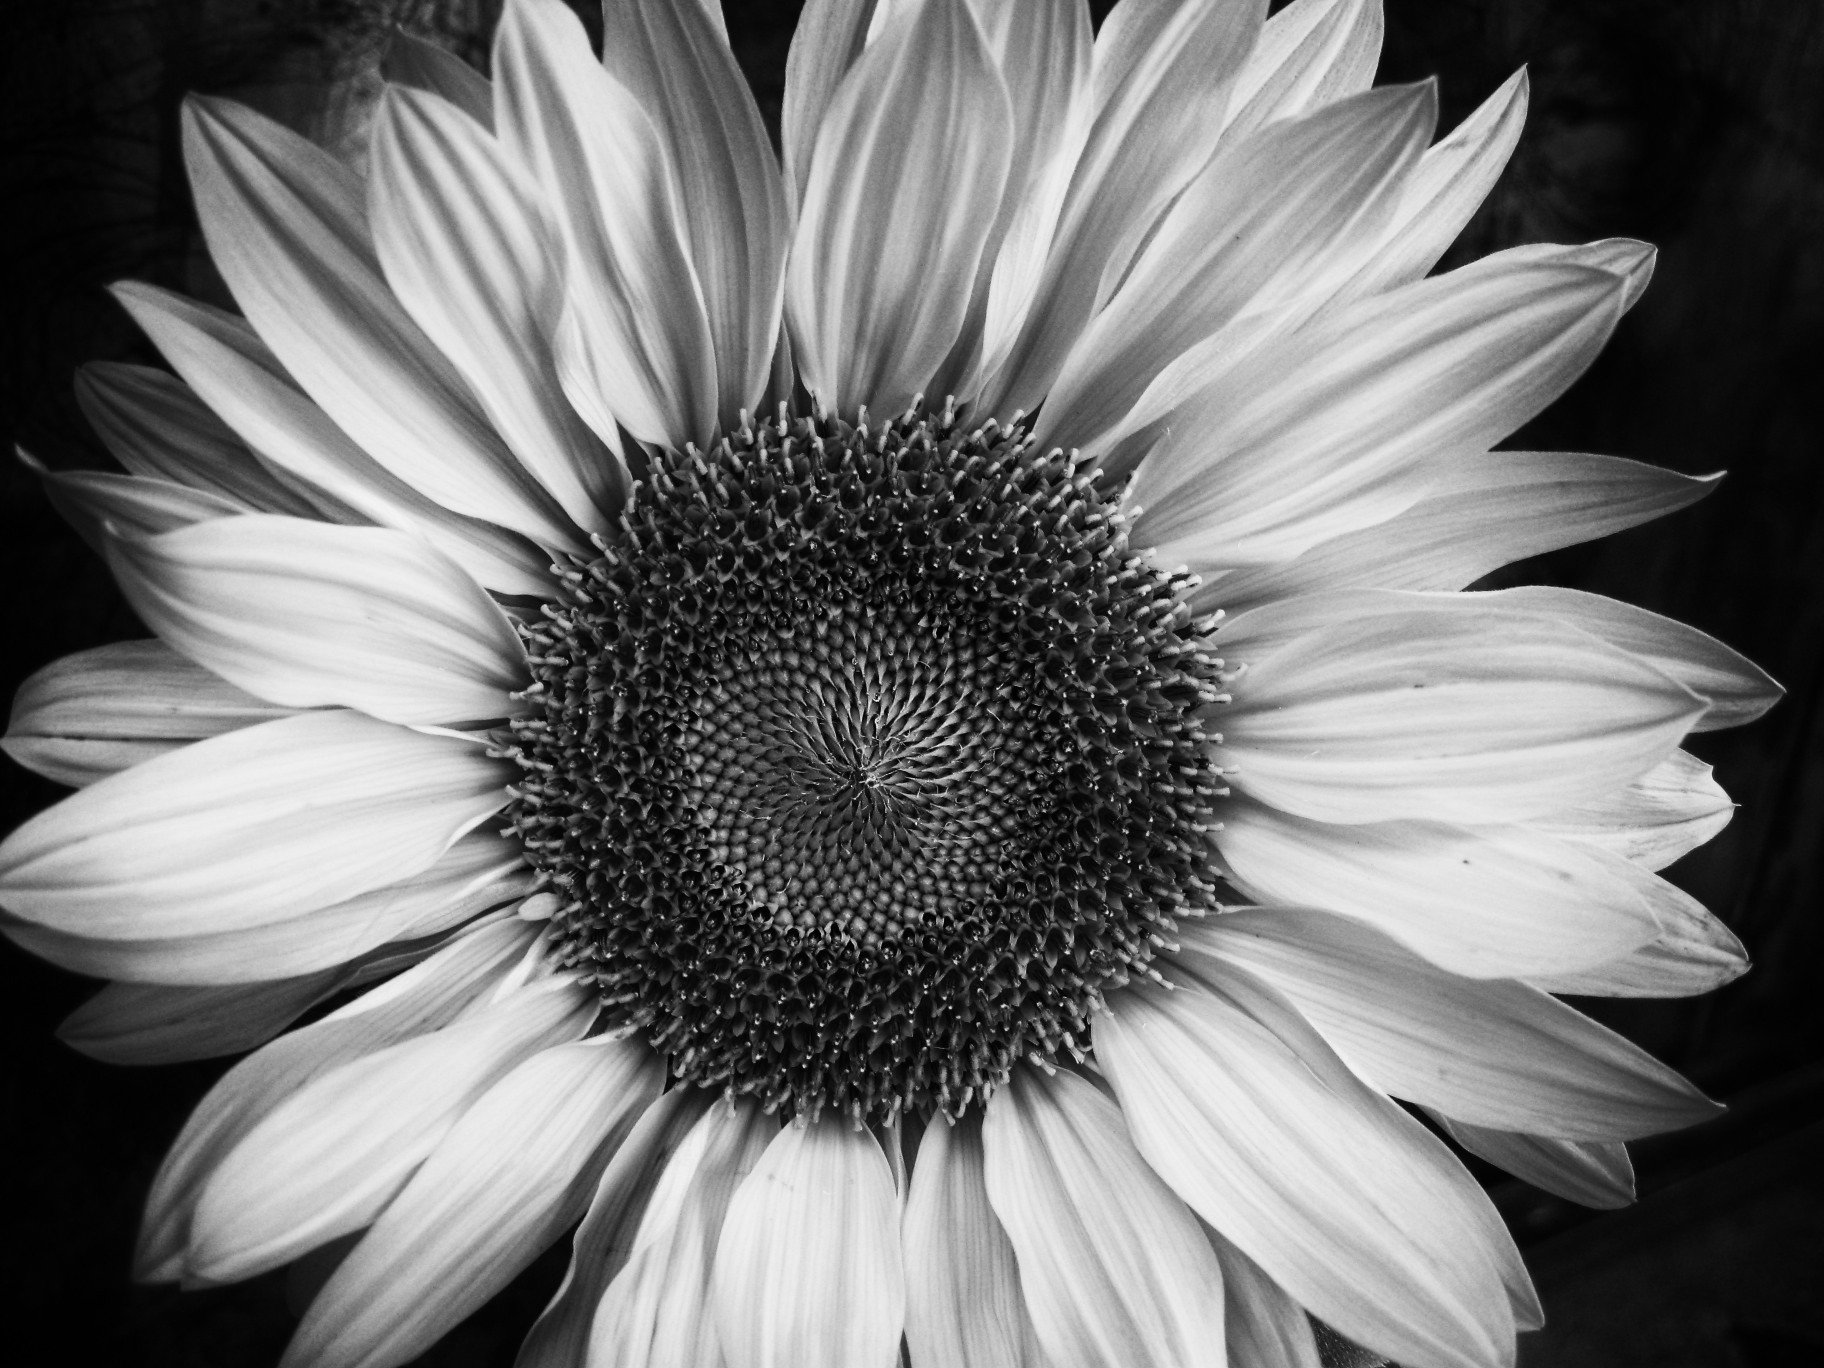 Black And White Images Of Flowers 11 Desktop Wallpaper - Flower Black And White Photography - HD Wallpaper 